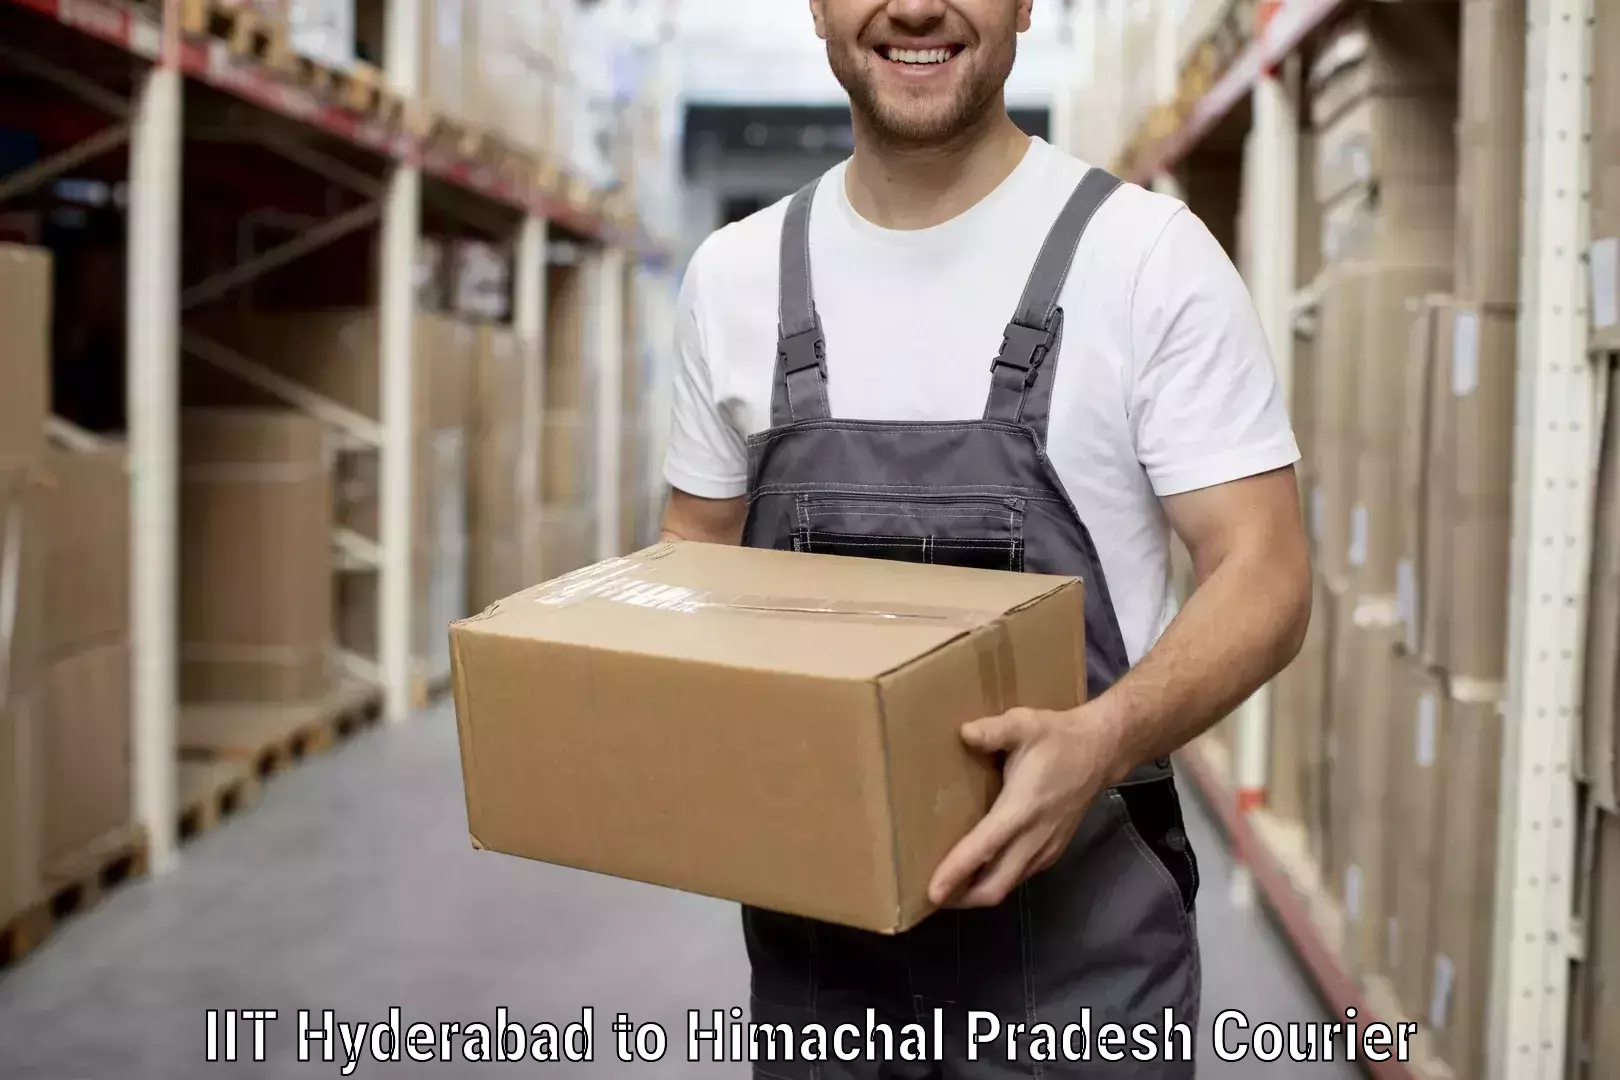 Professional moving company IIT Hyderabad to Palion